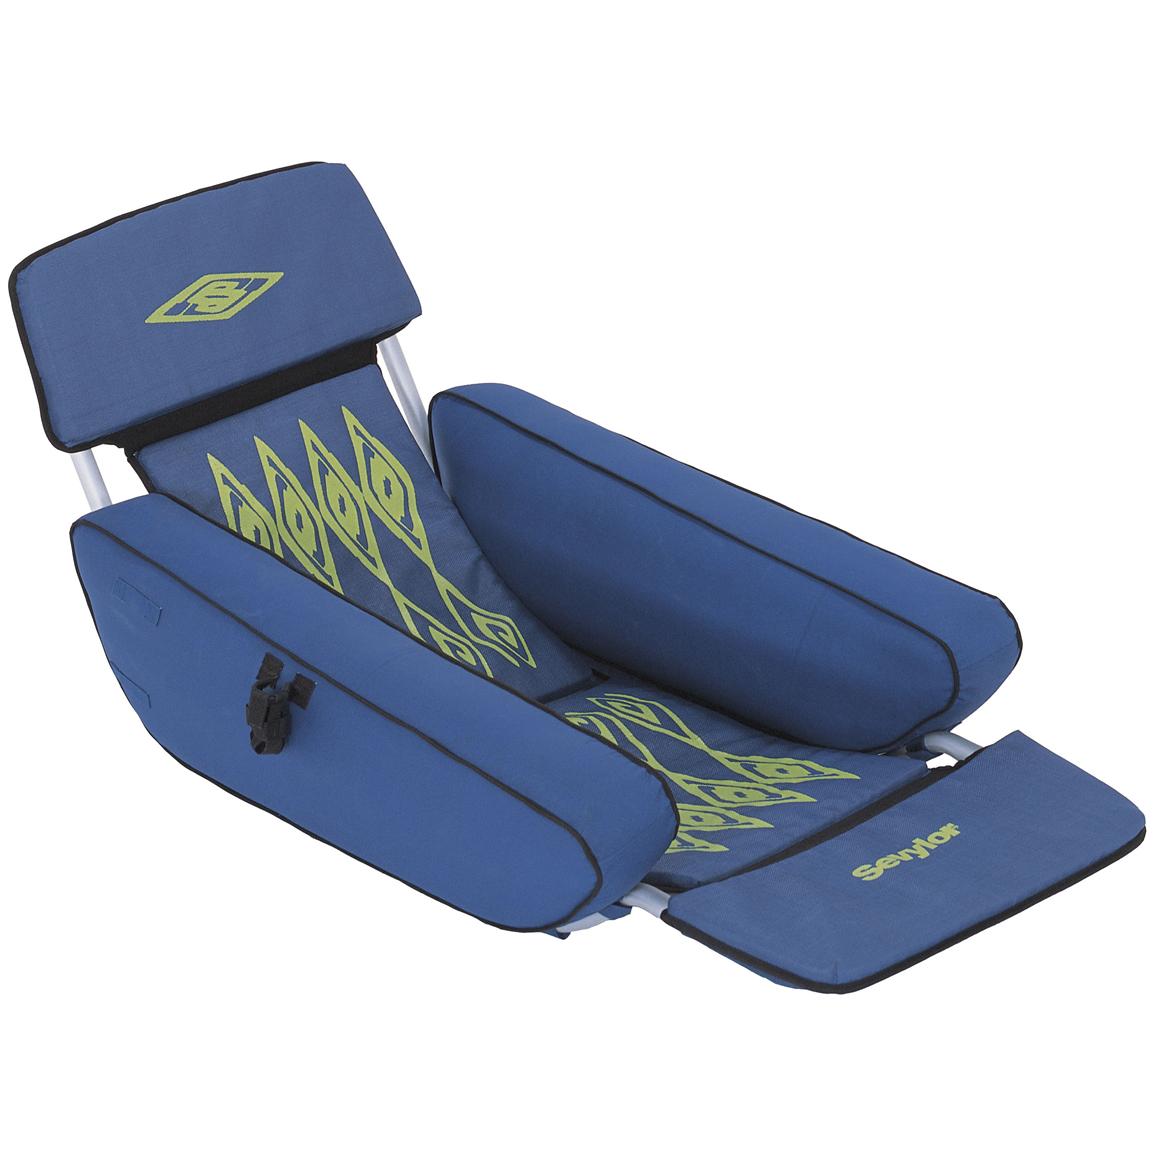 Sevylor® Inflatable Cabo™ Pool Lounge - 127458, Floats & Lounges at